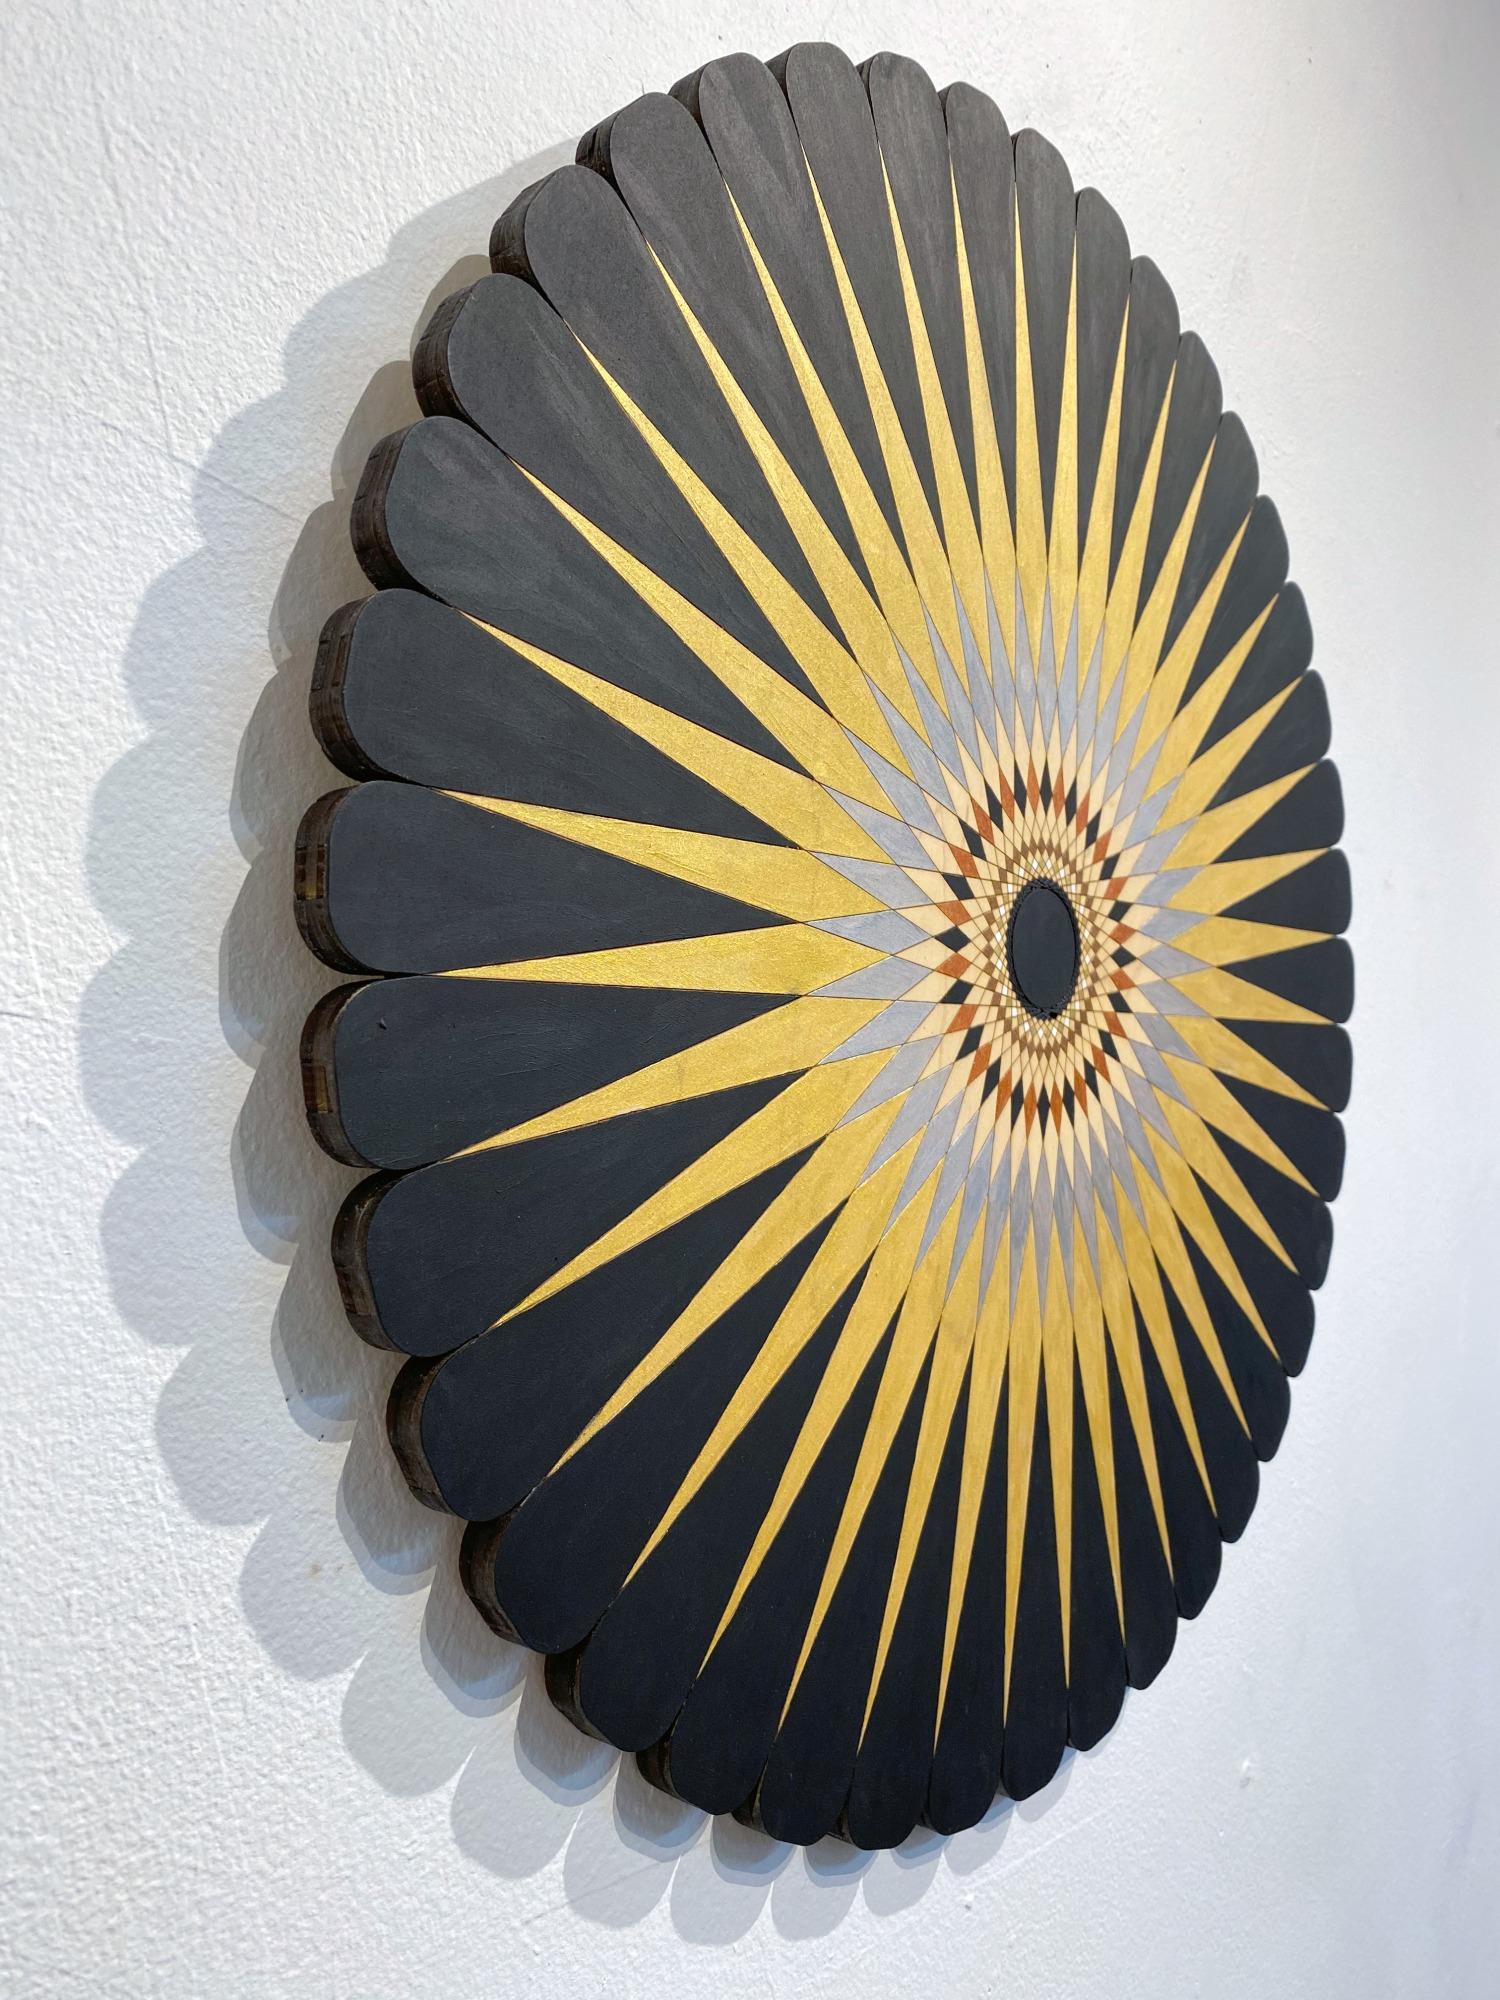 Starburst 1, Acrylic on Wood, Wall sculpture  by Christine Romanell 1